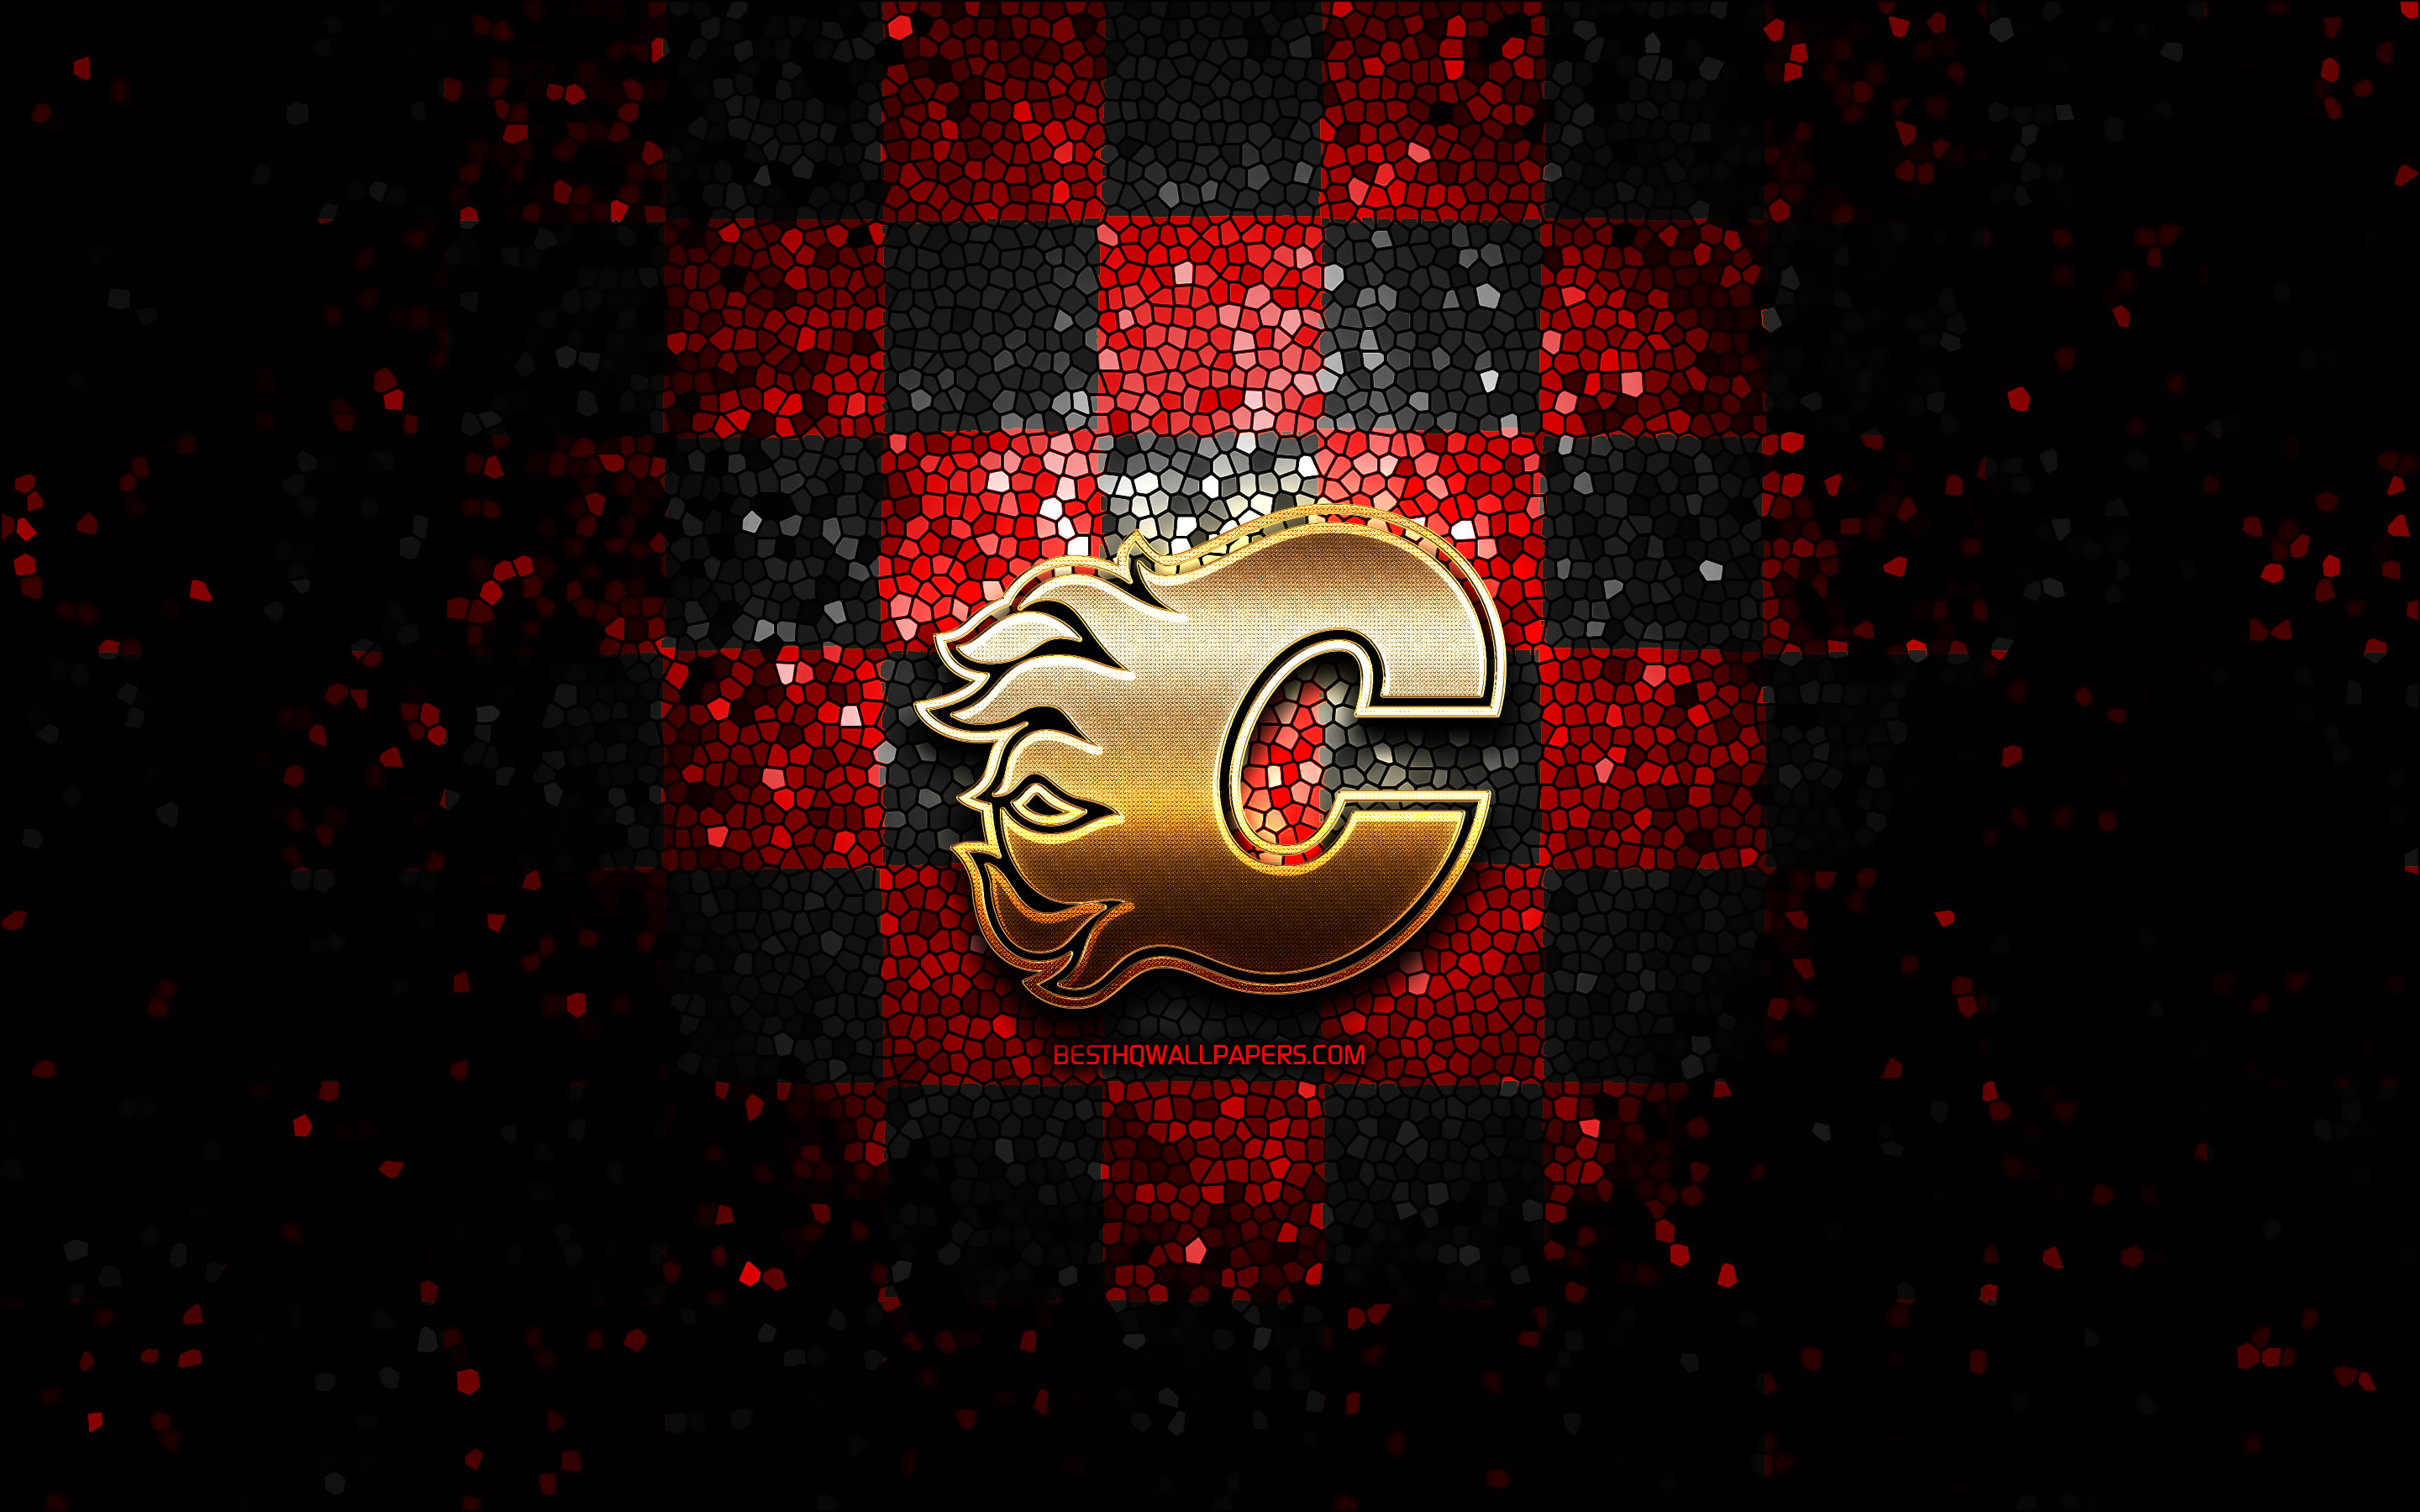 Download wallpaper Calgary Flames, glitter logo, NHL, red black checkered background, USA, canadian hockey team, Calgary Flames logo, mosaic art, hockey, Canada for desktop with resolution 2880x1800. High Quality HD picture wallpaper